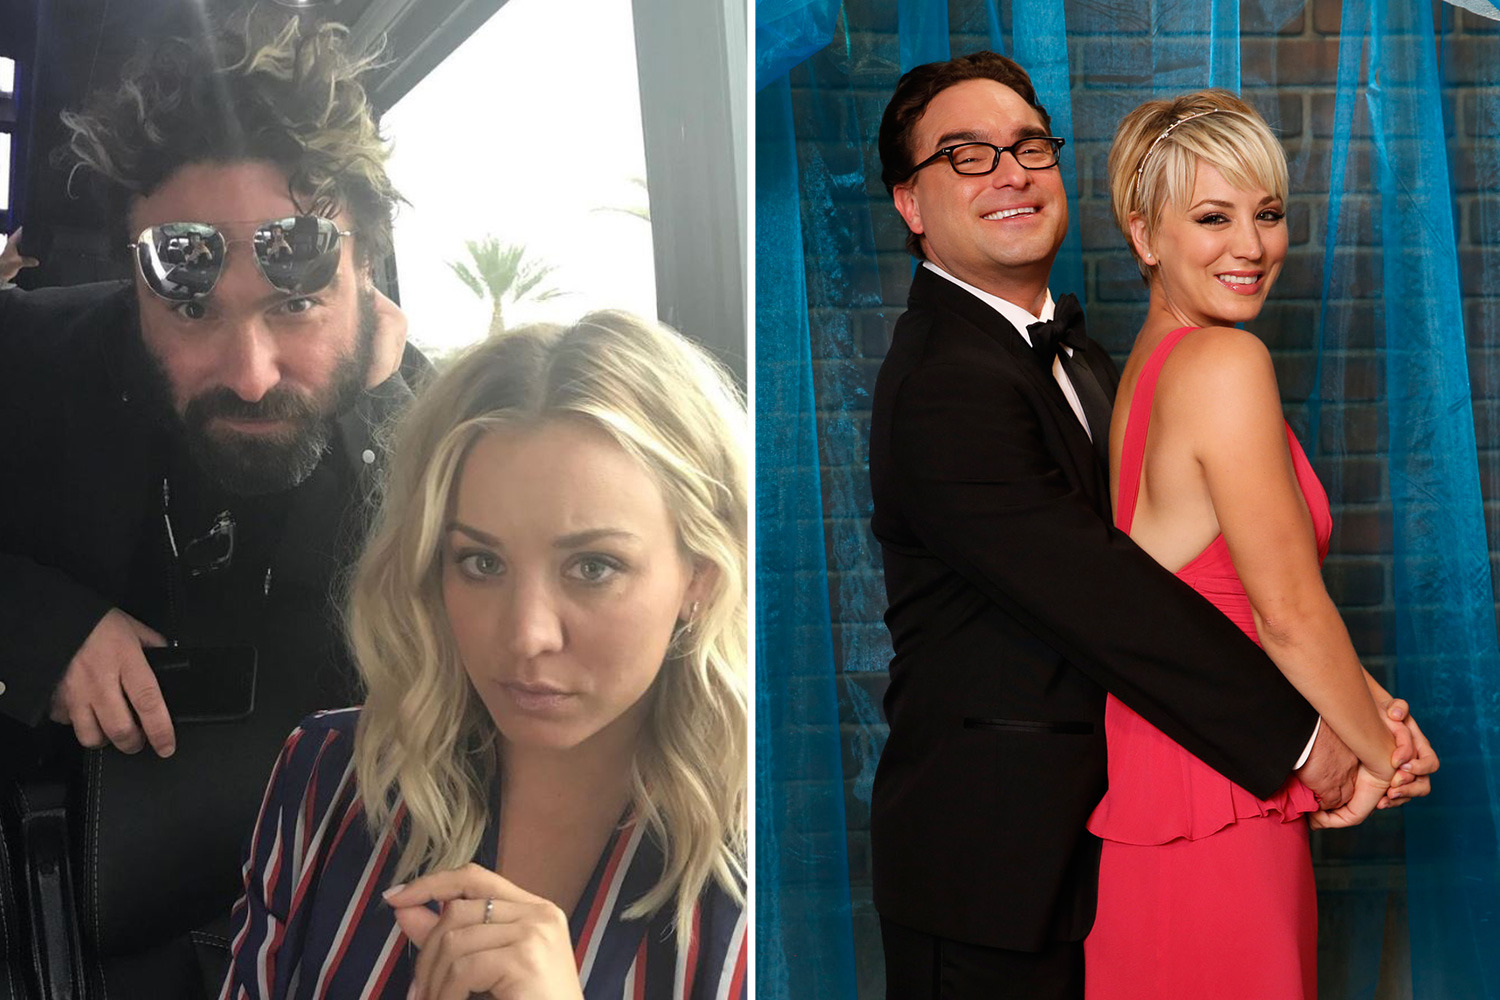 cathy pegg recommends kaley cuoco porn fake pic